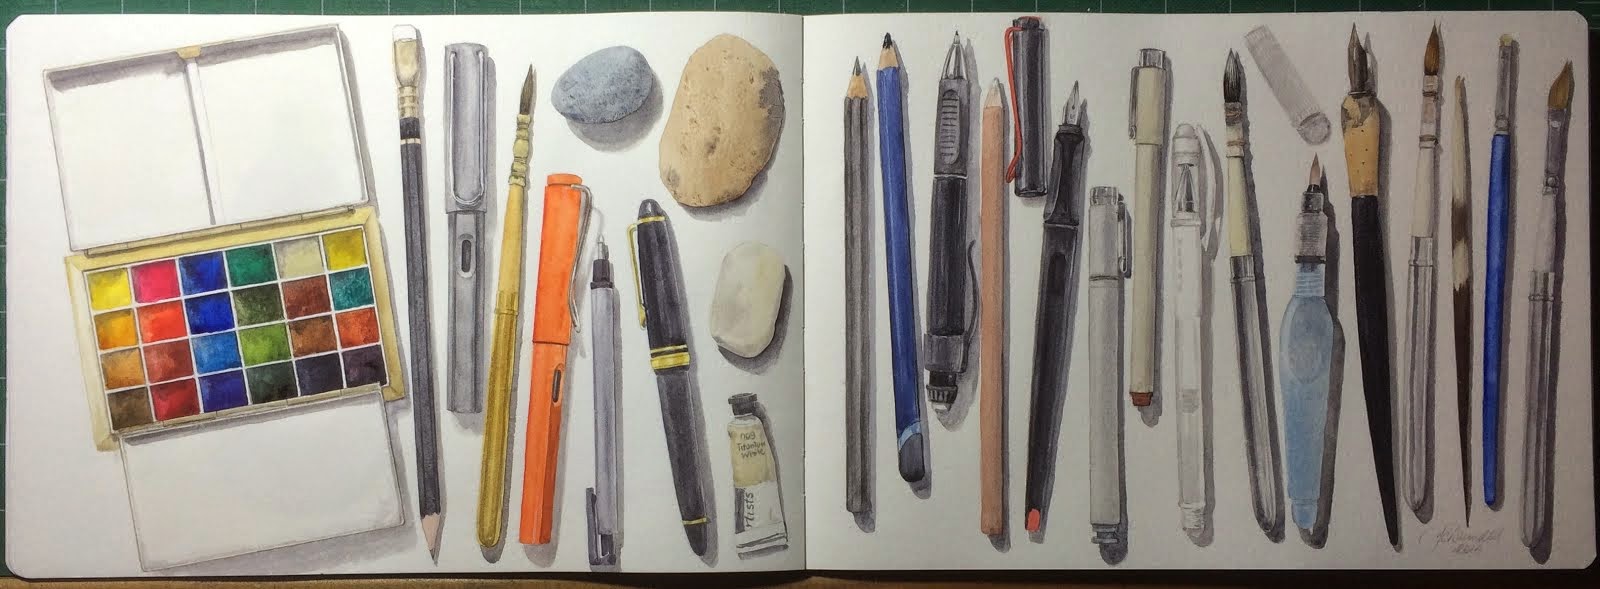 My current sketching tools.